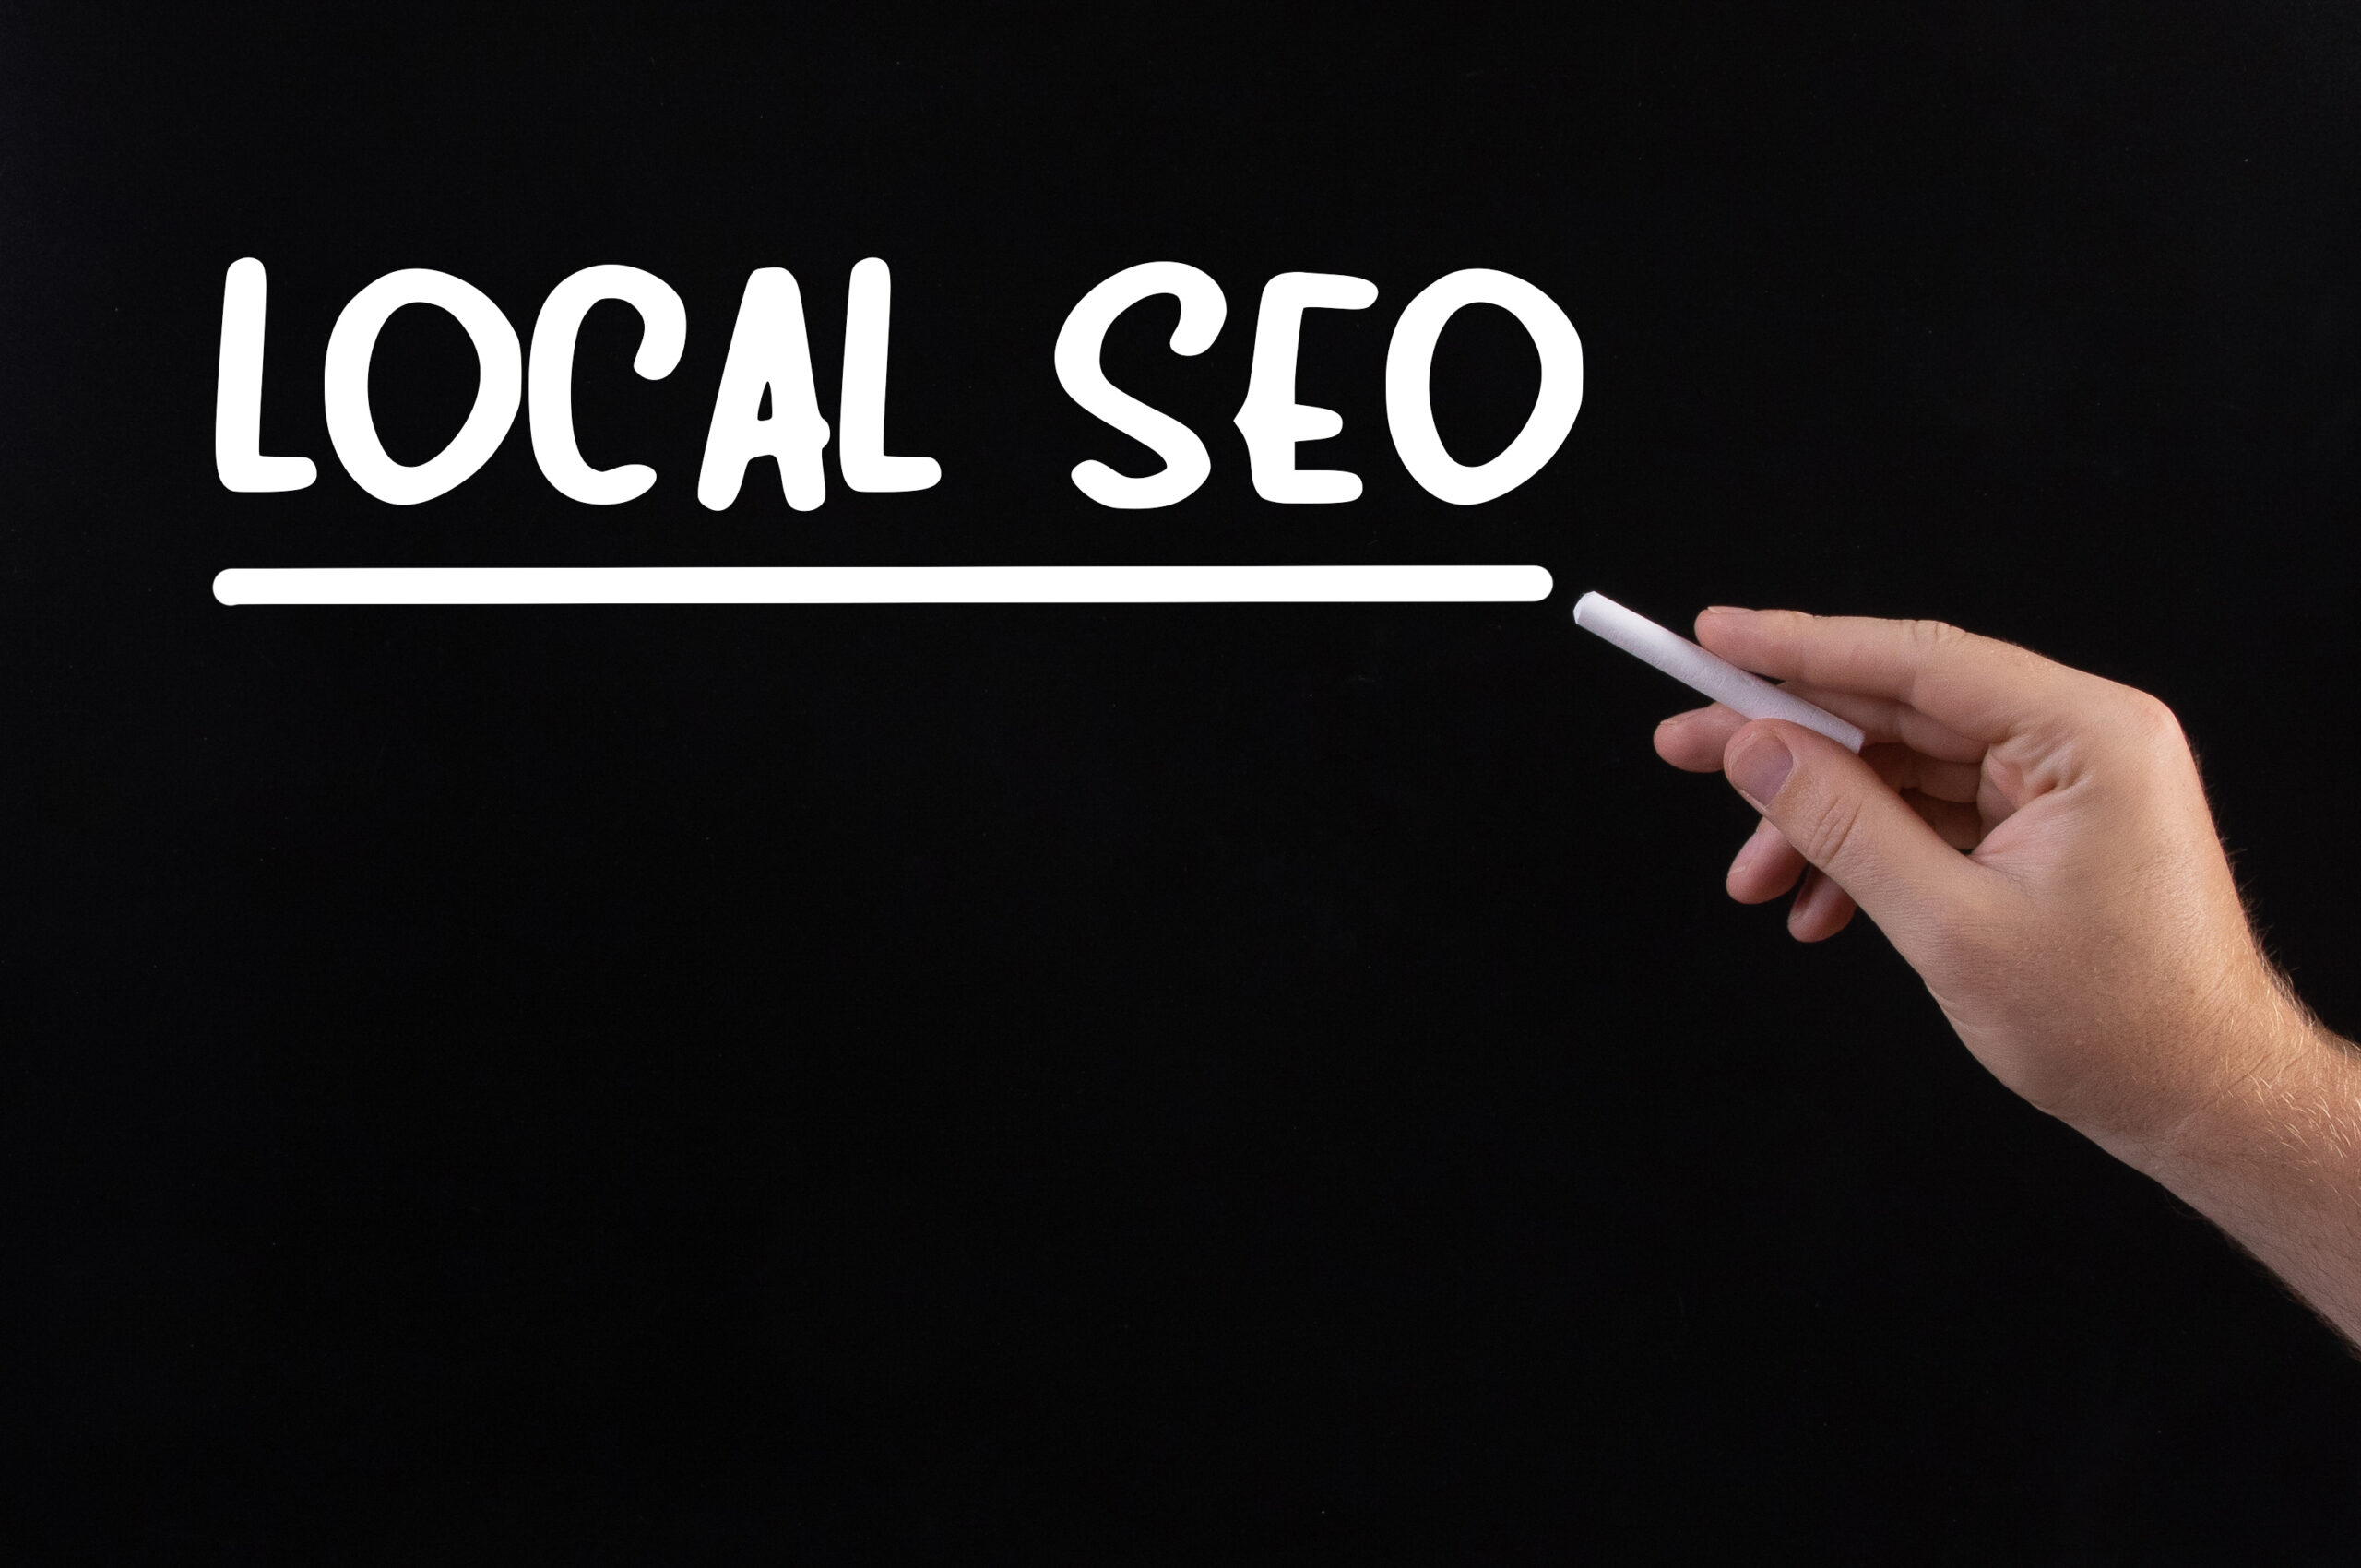 Top 7 Local SEO Tips That Will Skyrocket Your Site Traffic